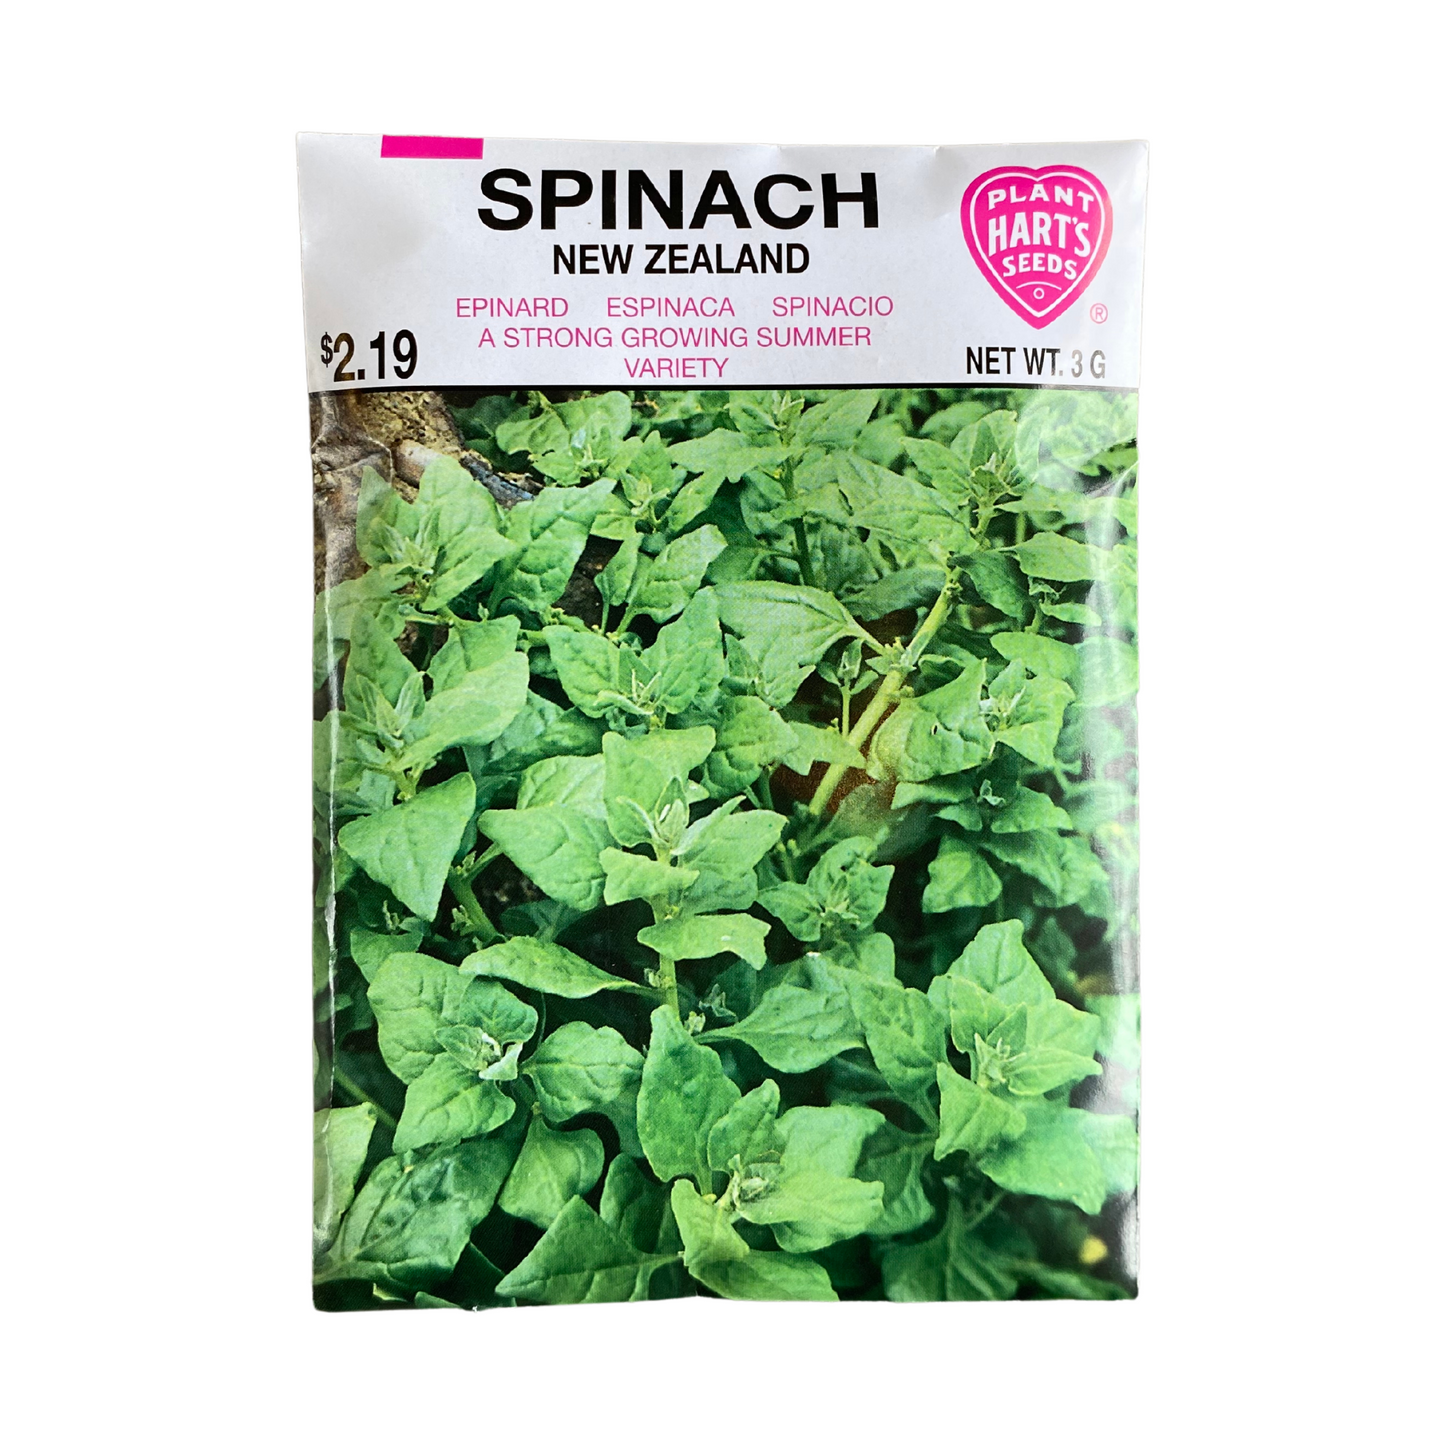 Spinach New Zealand